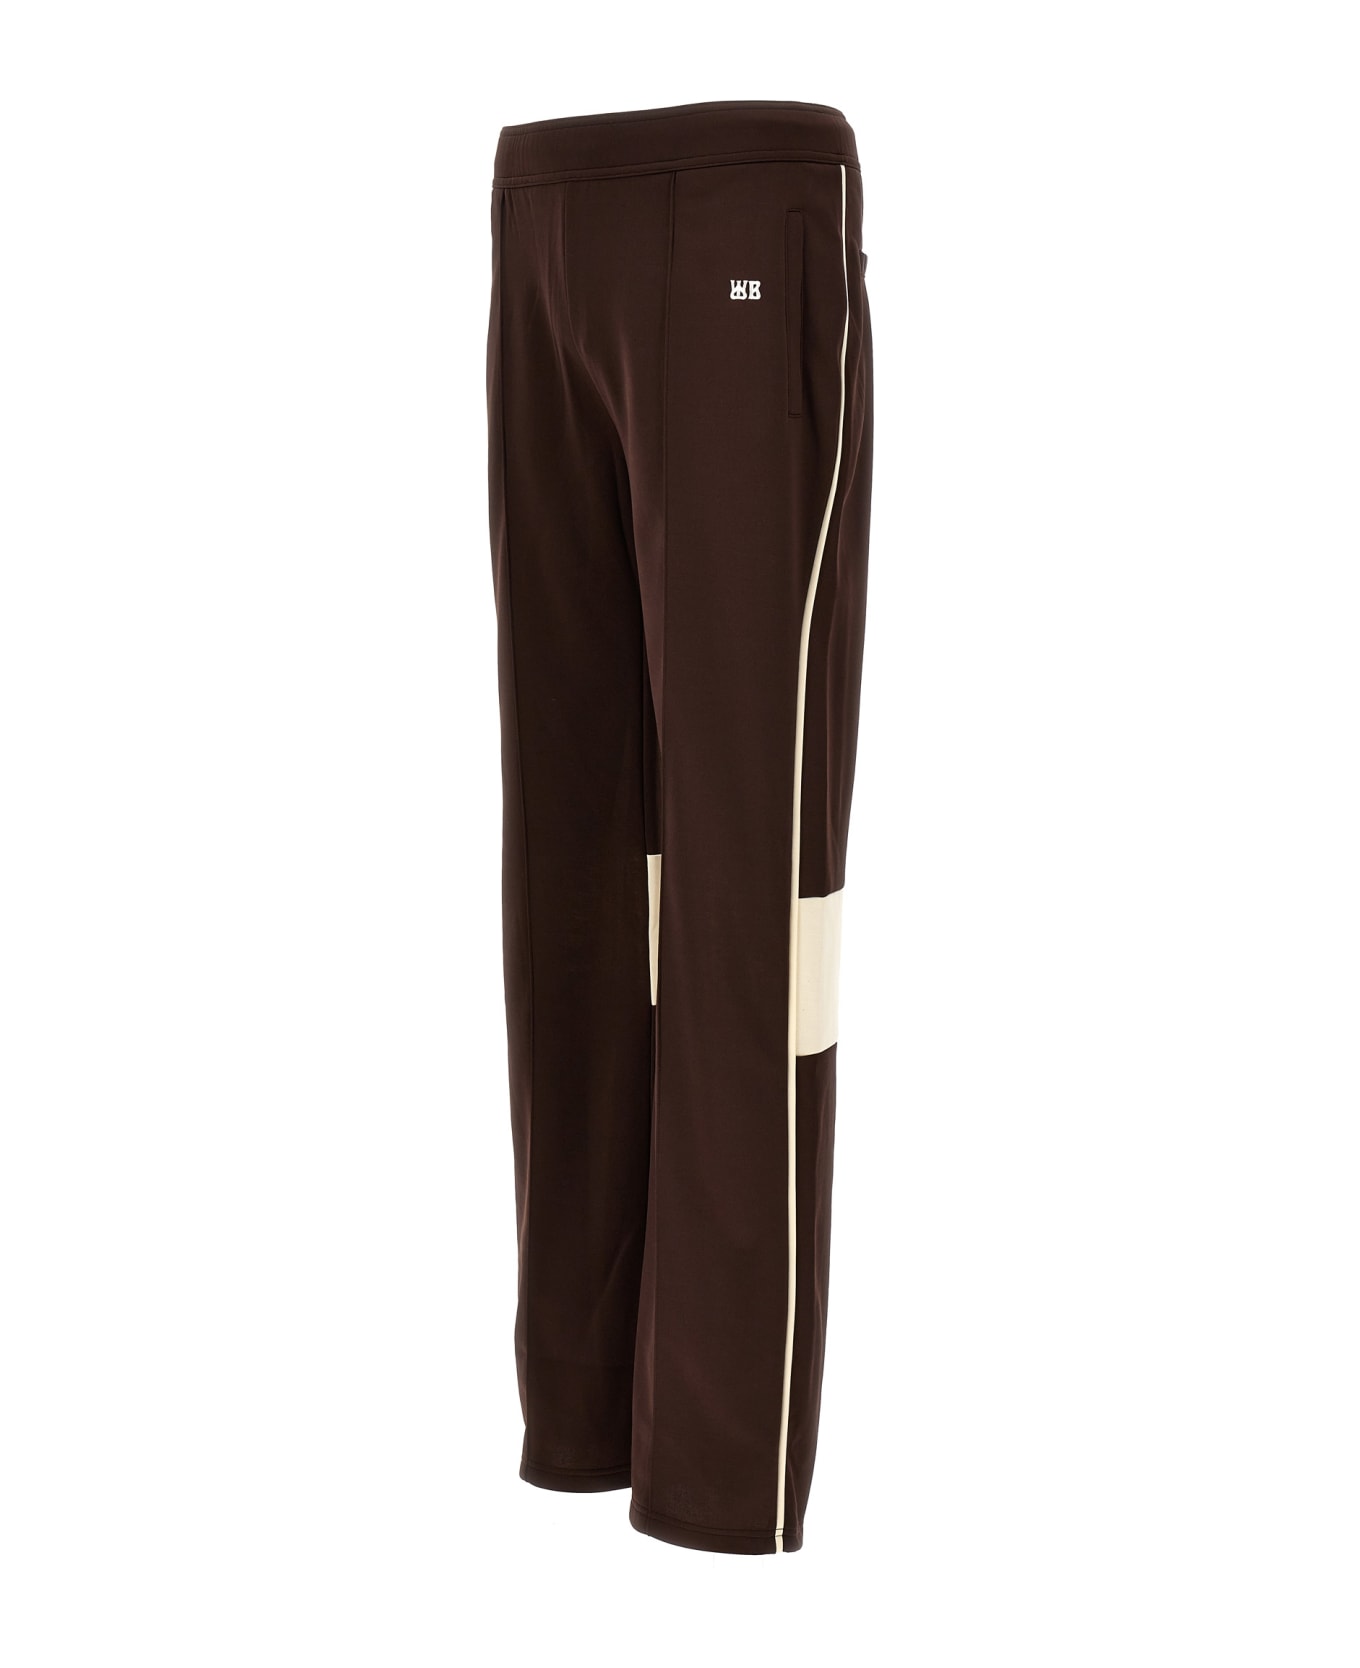 Wales Bonner 'track' Joggers - BROWN